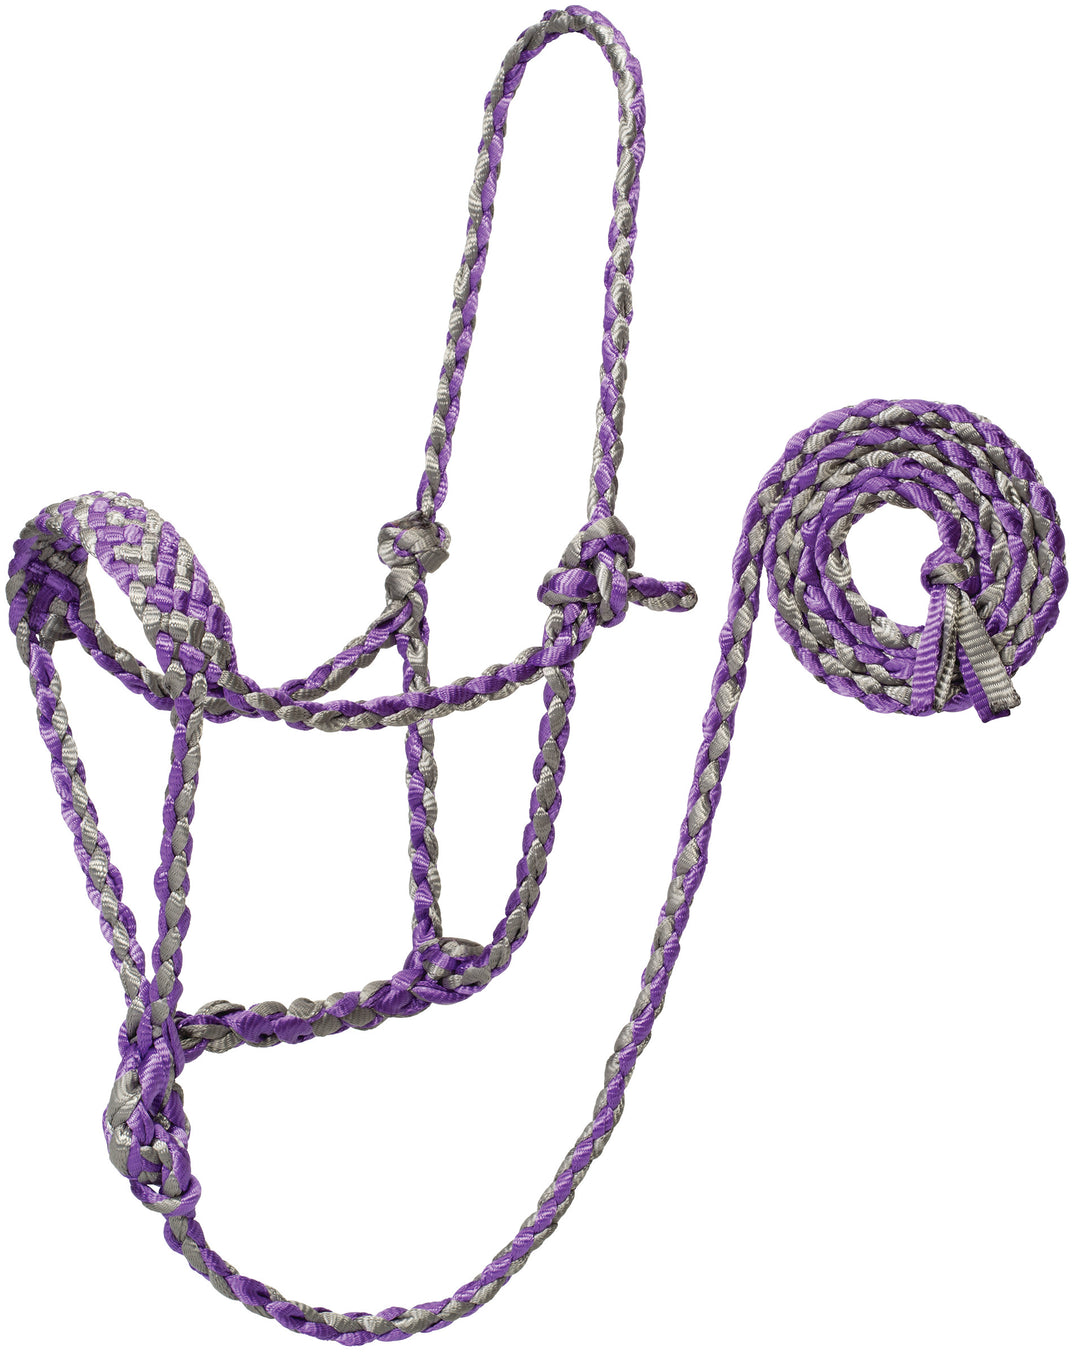 Weaver Braided Rope Halter with 10' Lead (Multiple Color Options)